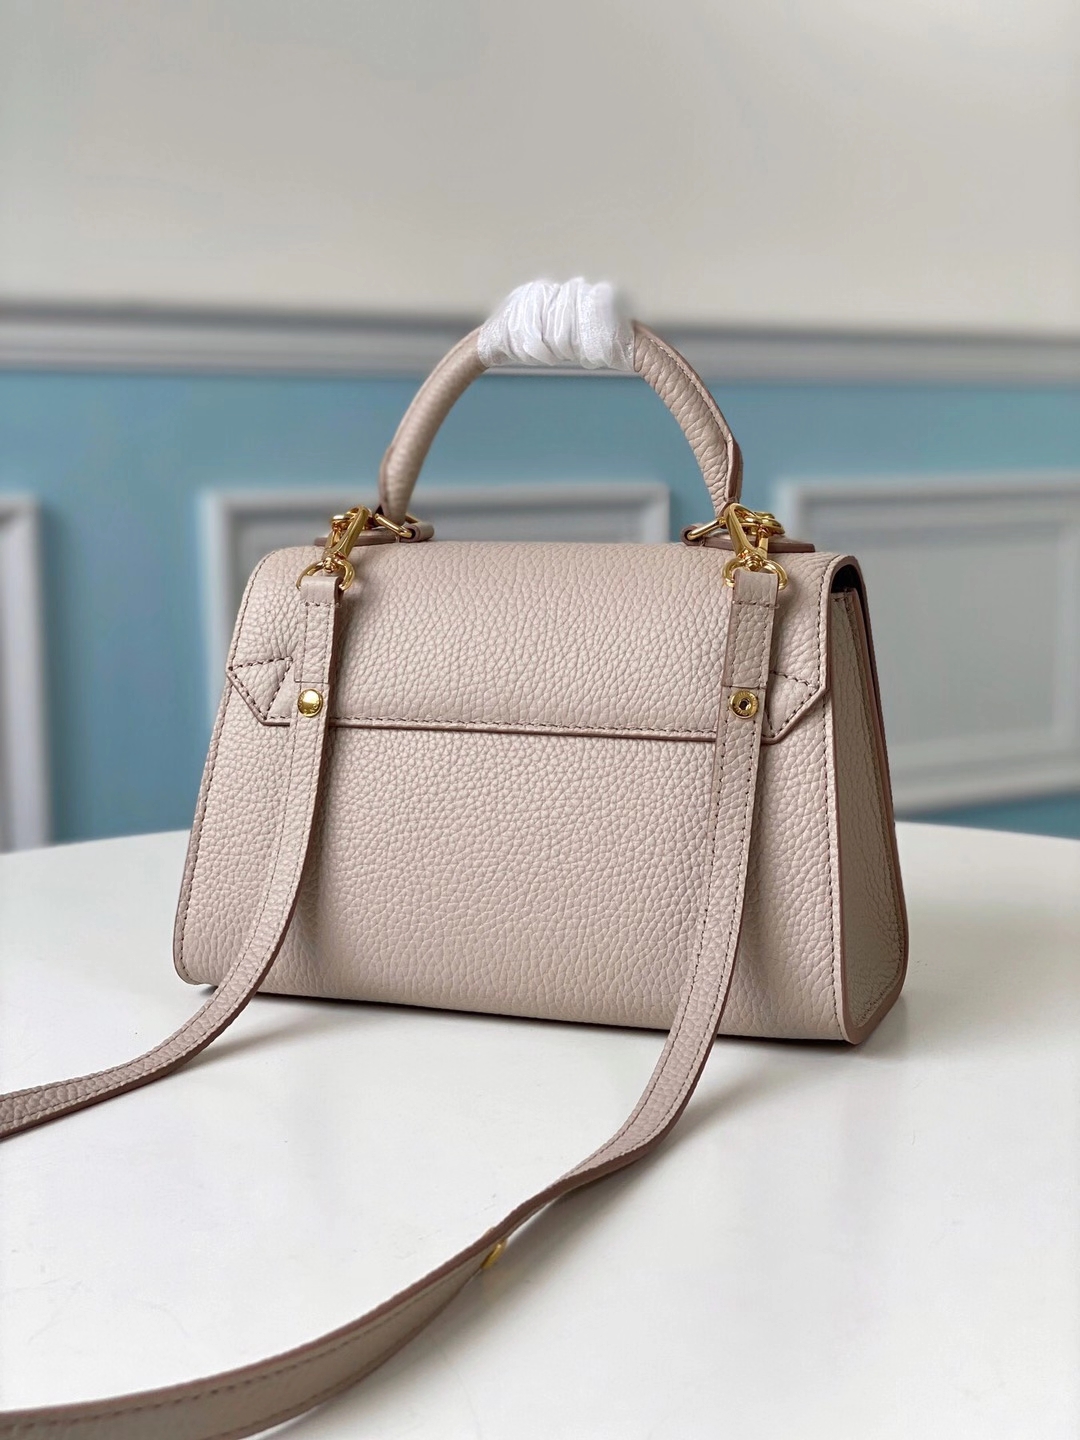 Twist One Handle PM Taurillon Leather in Beige - Handbags M57214, L*V –  ZAK BAGS ©️